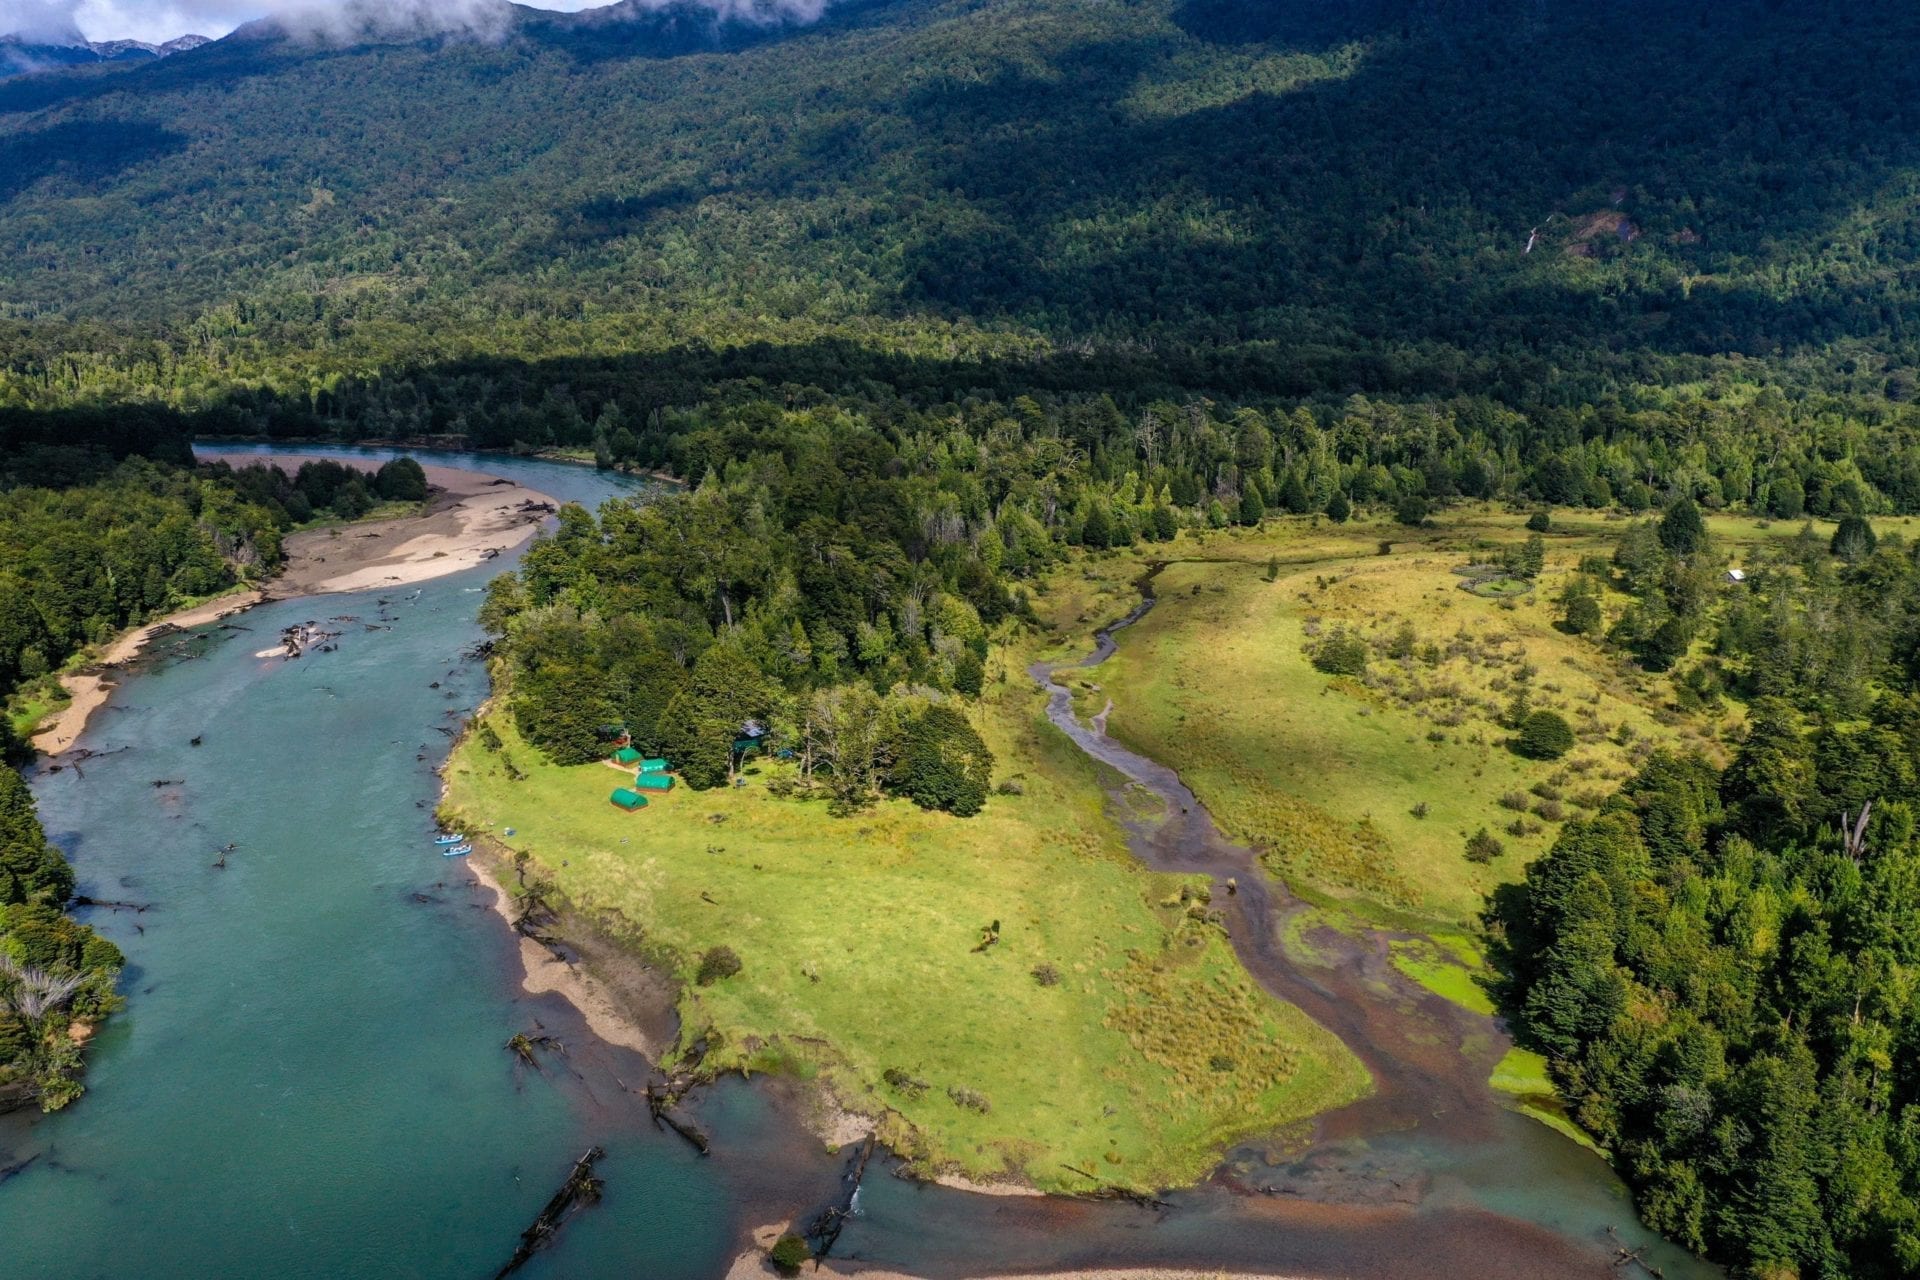 Rio Blanco remote luxury camp from the air